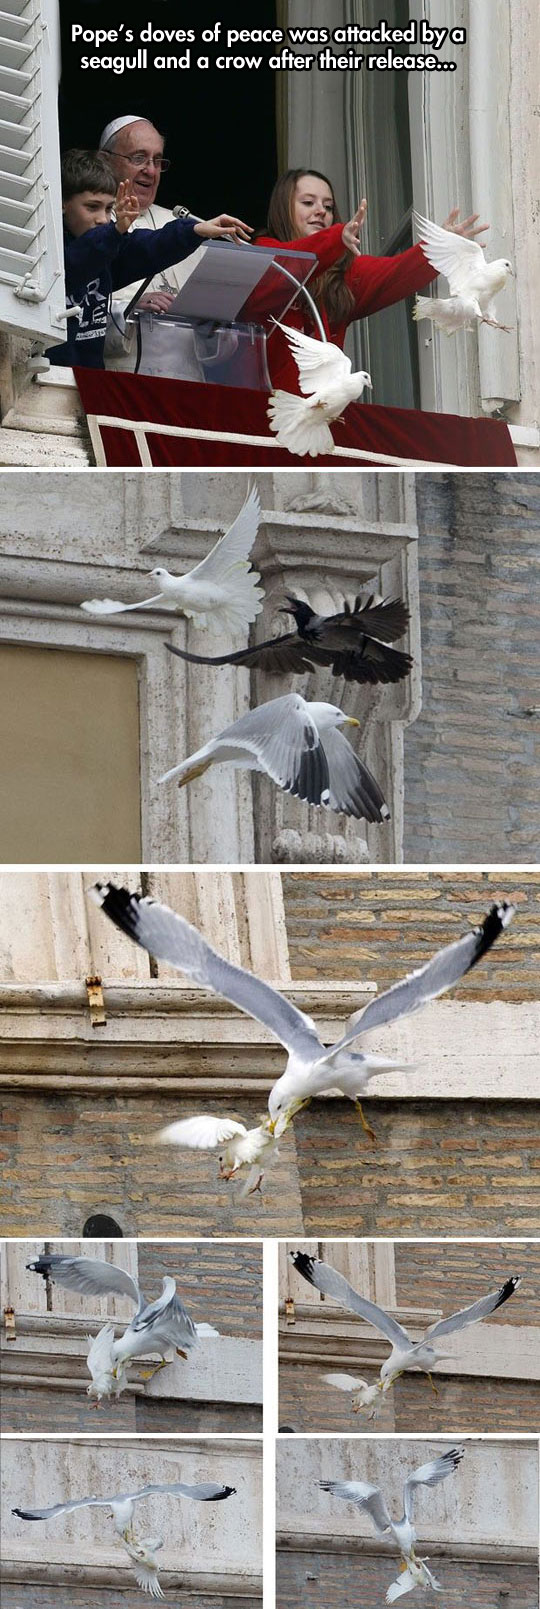 That seagull is a real bird of pray…